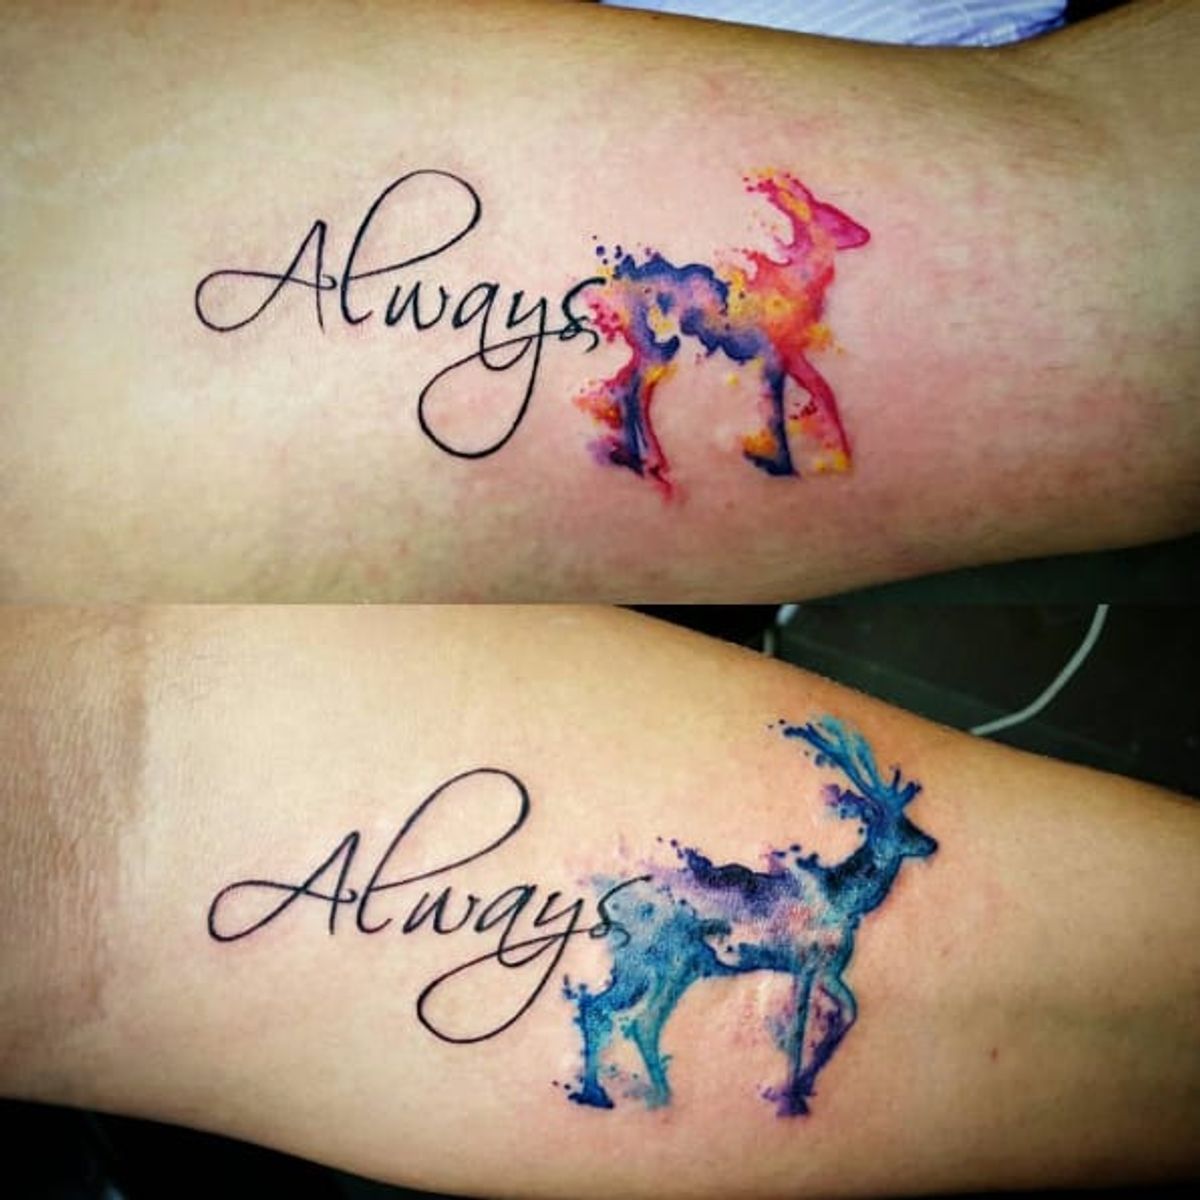 Tattoo uploaded by Tattoodo • Beautiful watercolor stag and doe couple  tattoos by @_glitterpoops on Instagram #coupletattoo #coupletattoos  #matchingtattoos #romantic #tattooedcouple #lovetattoos #doe #stag #animals  #watercolor • Tattoodo